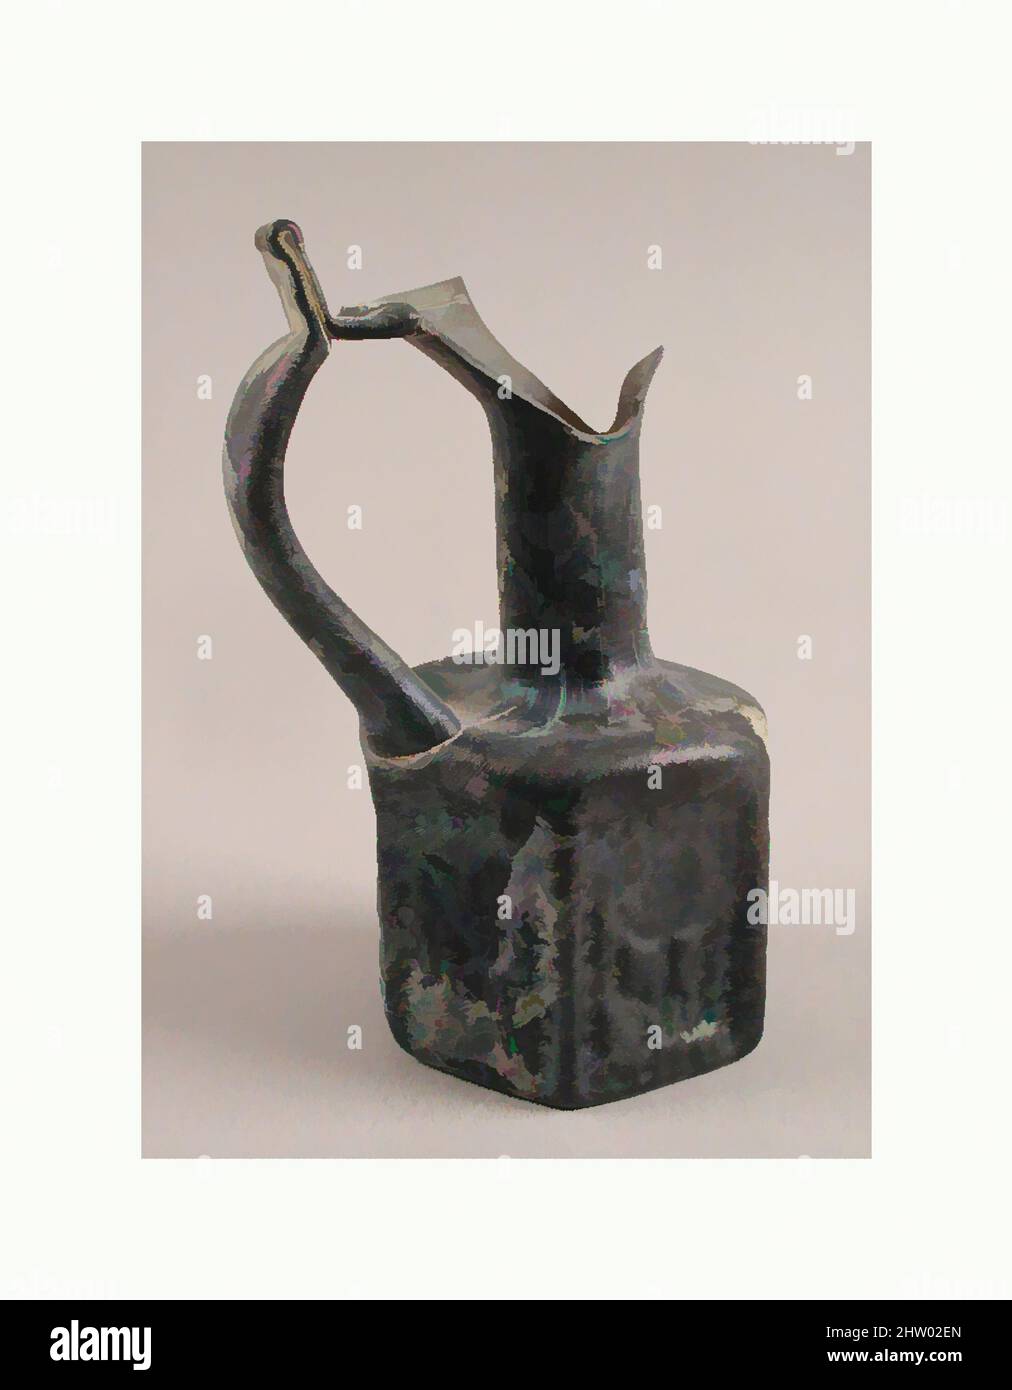 Art inspired by Jug, 6th–7th century, Jewish, Glass, Overall: 5 13/16 x 4 x 2 5/8 in. (14.7 x 10.1 x 6.7 cm), Glass-Vessels, Classic works modernized by Artotop with a splash of modernity. Shapes, color and value, eye-catching visual impact on art. Emotions through freedom of artworks in a contemporary way. A timeless message pursuing a wildly creative new direction. Artists turning to the digital medium and creating the Artotop NFT Stock Photo